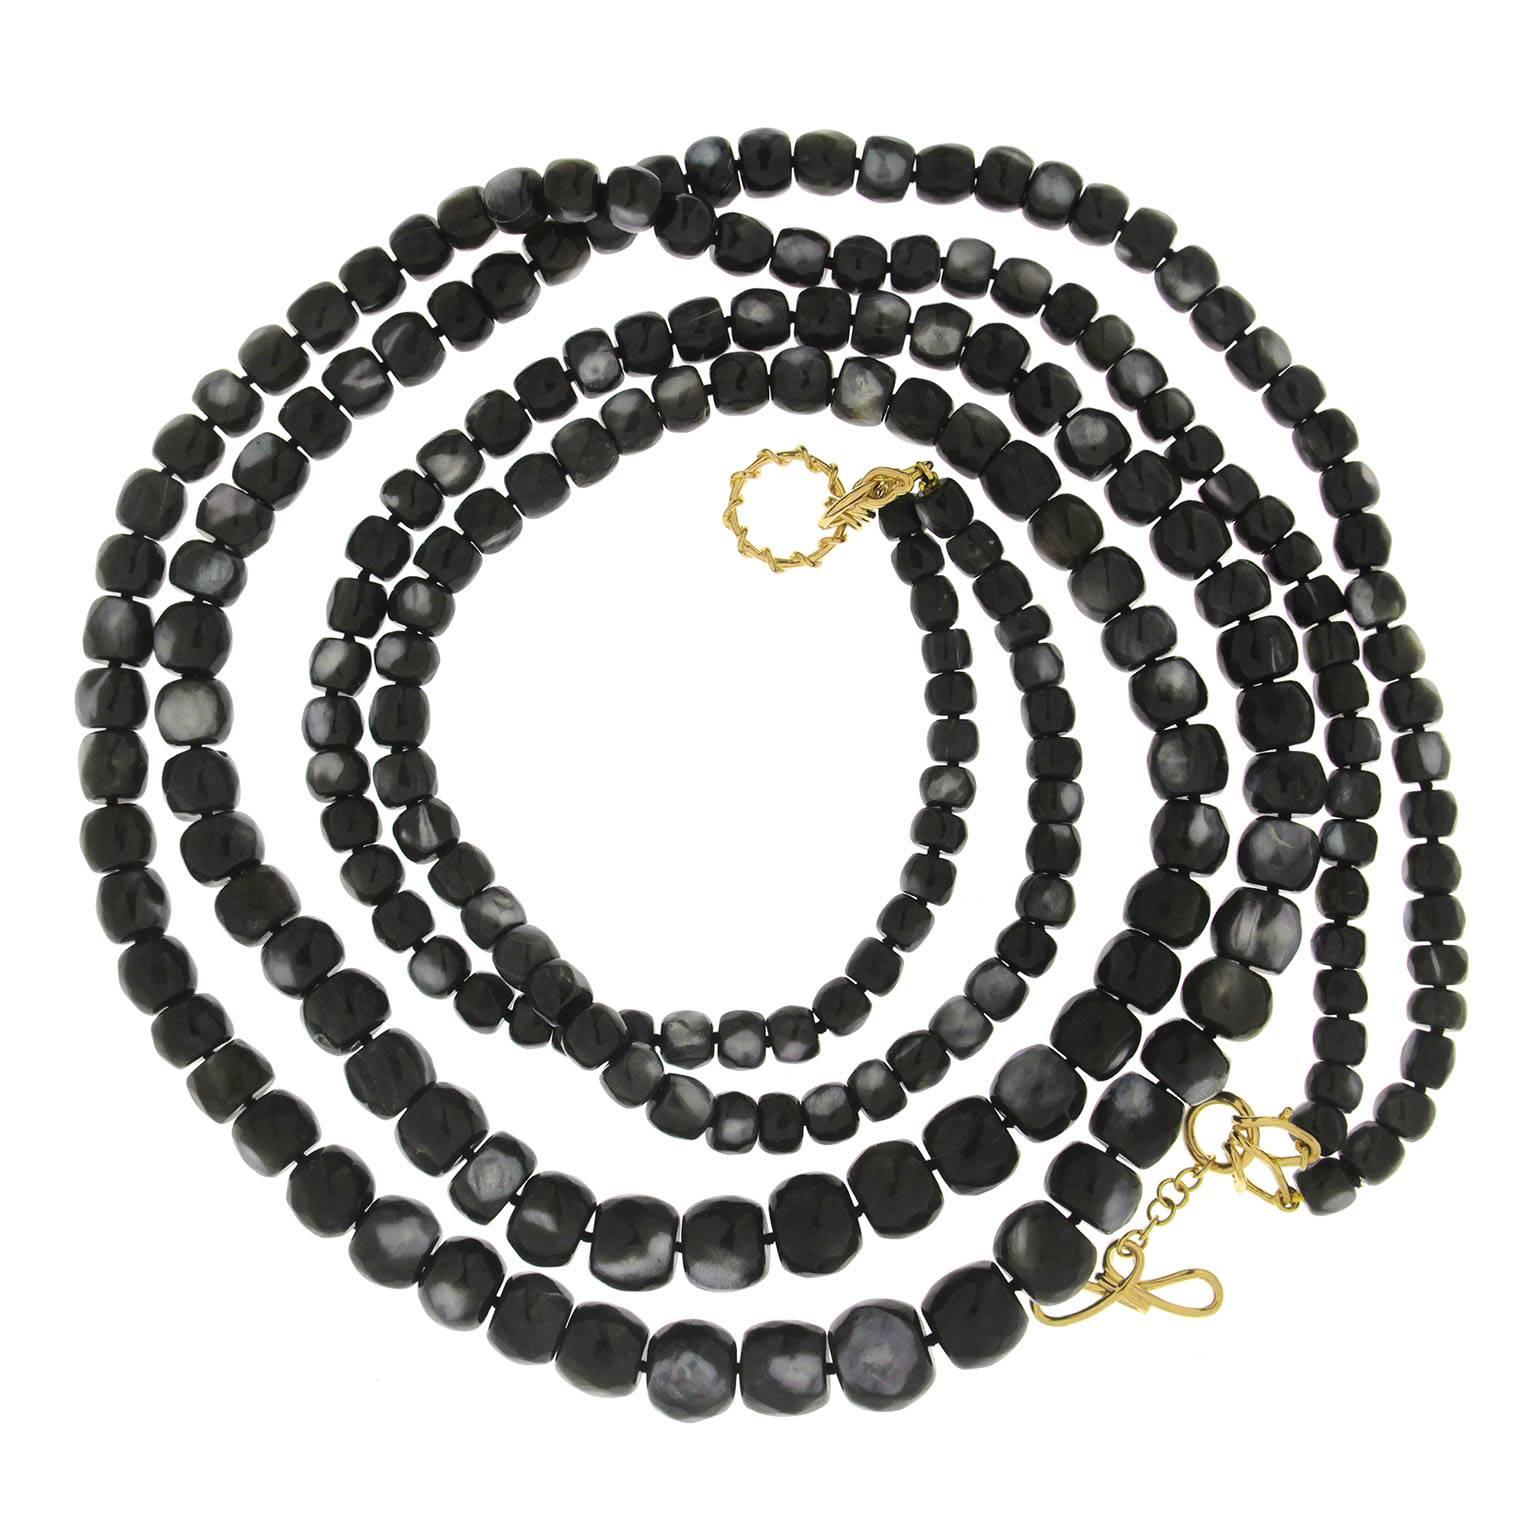 Modern Valentin Magro Multi-Strand Barrel Shaped Faceted Black Mother of Pearl Necklace